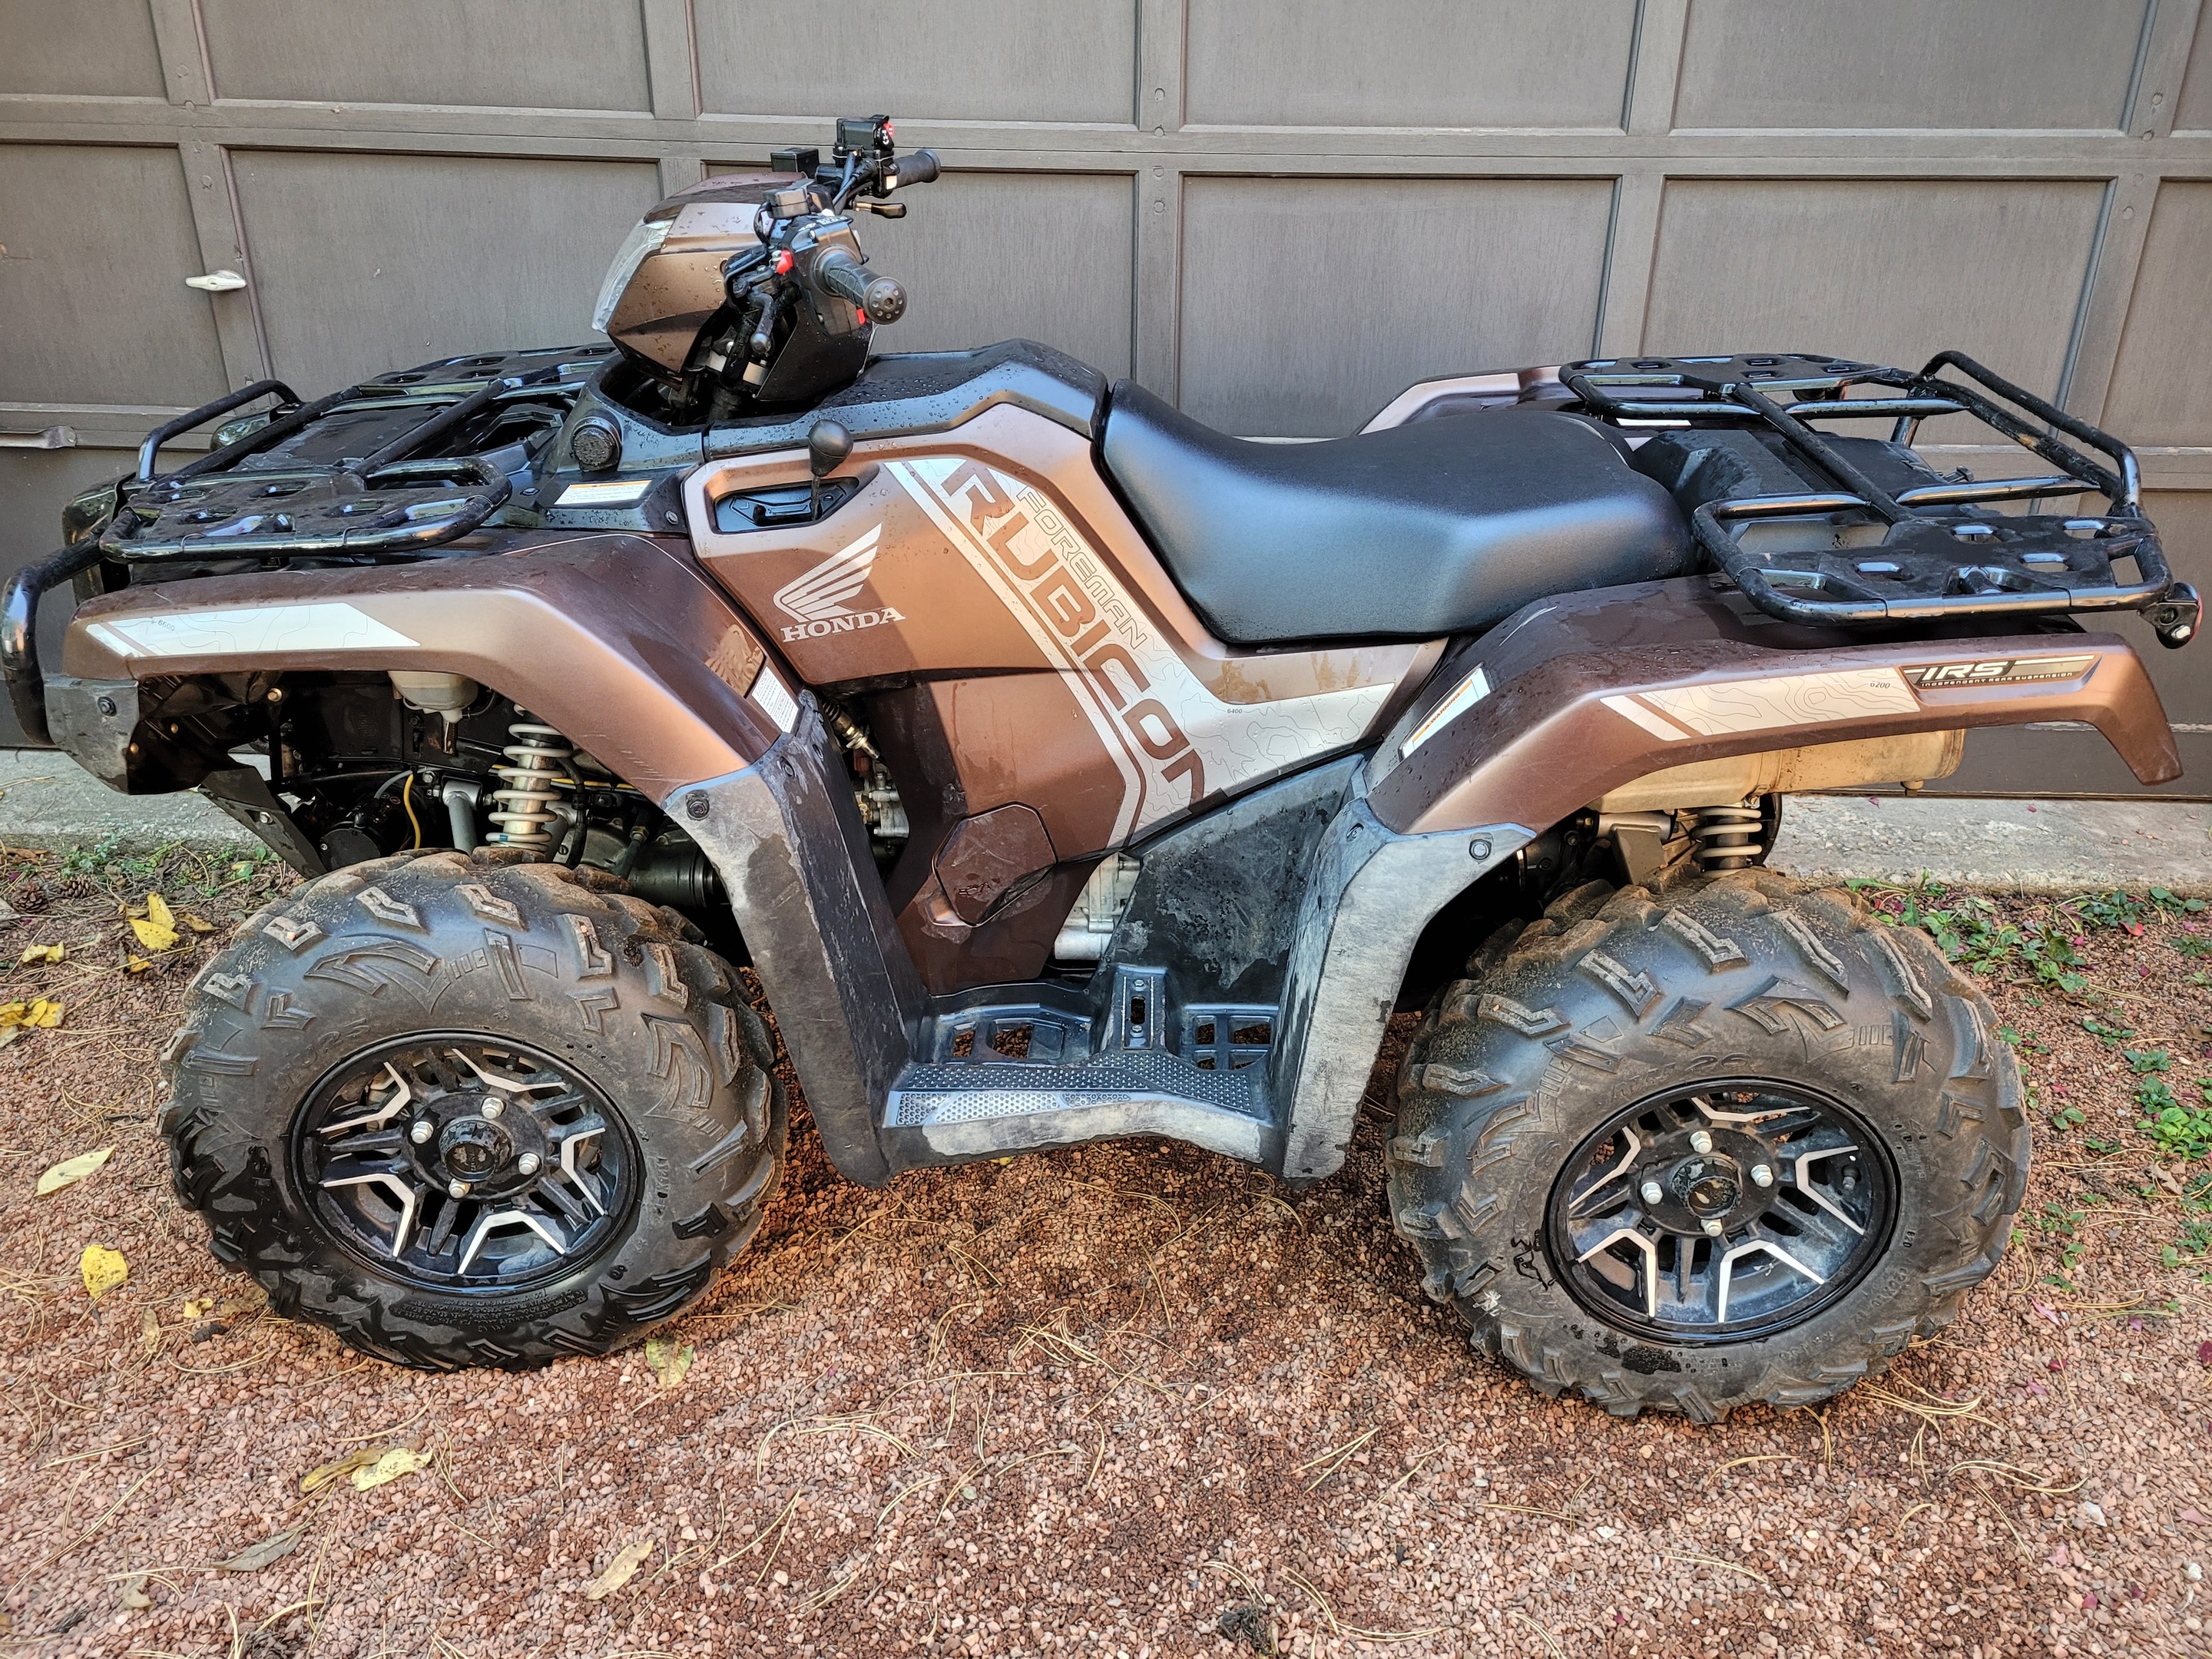 2021 Honda FourTrax Foreman Rubicon Deluxe  Financing Available & Trade-ins Welcome!